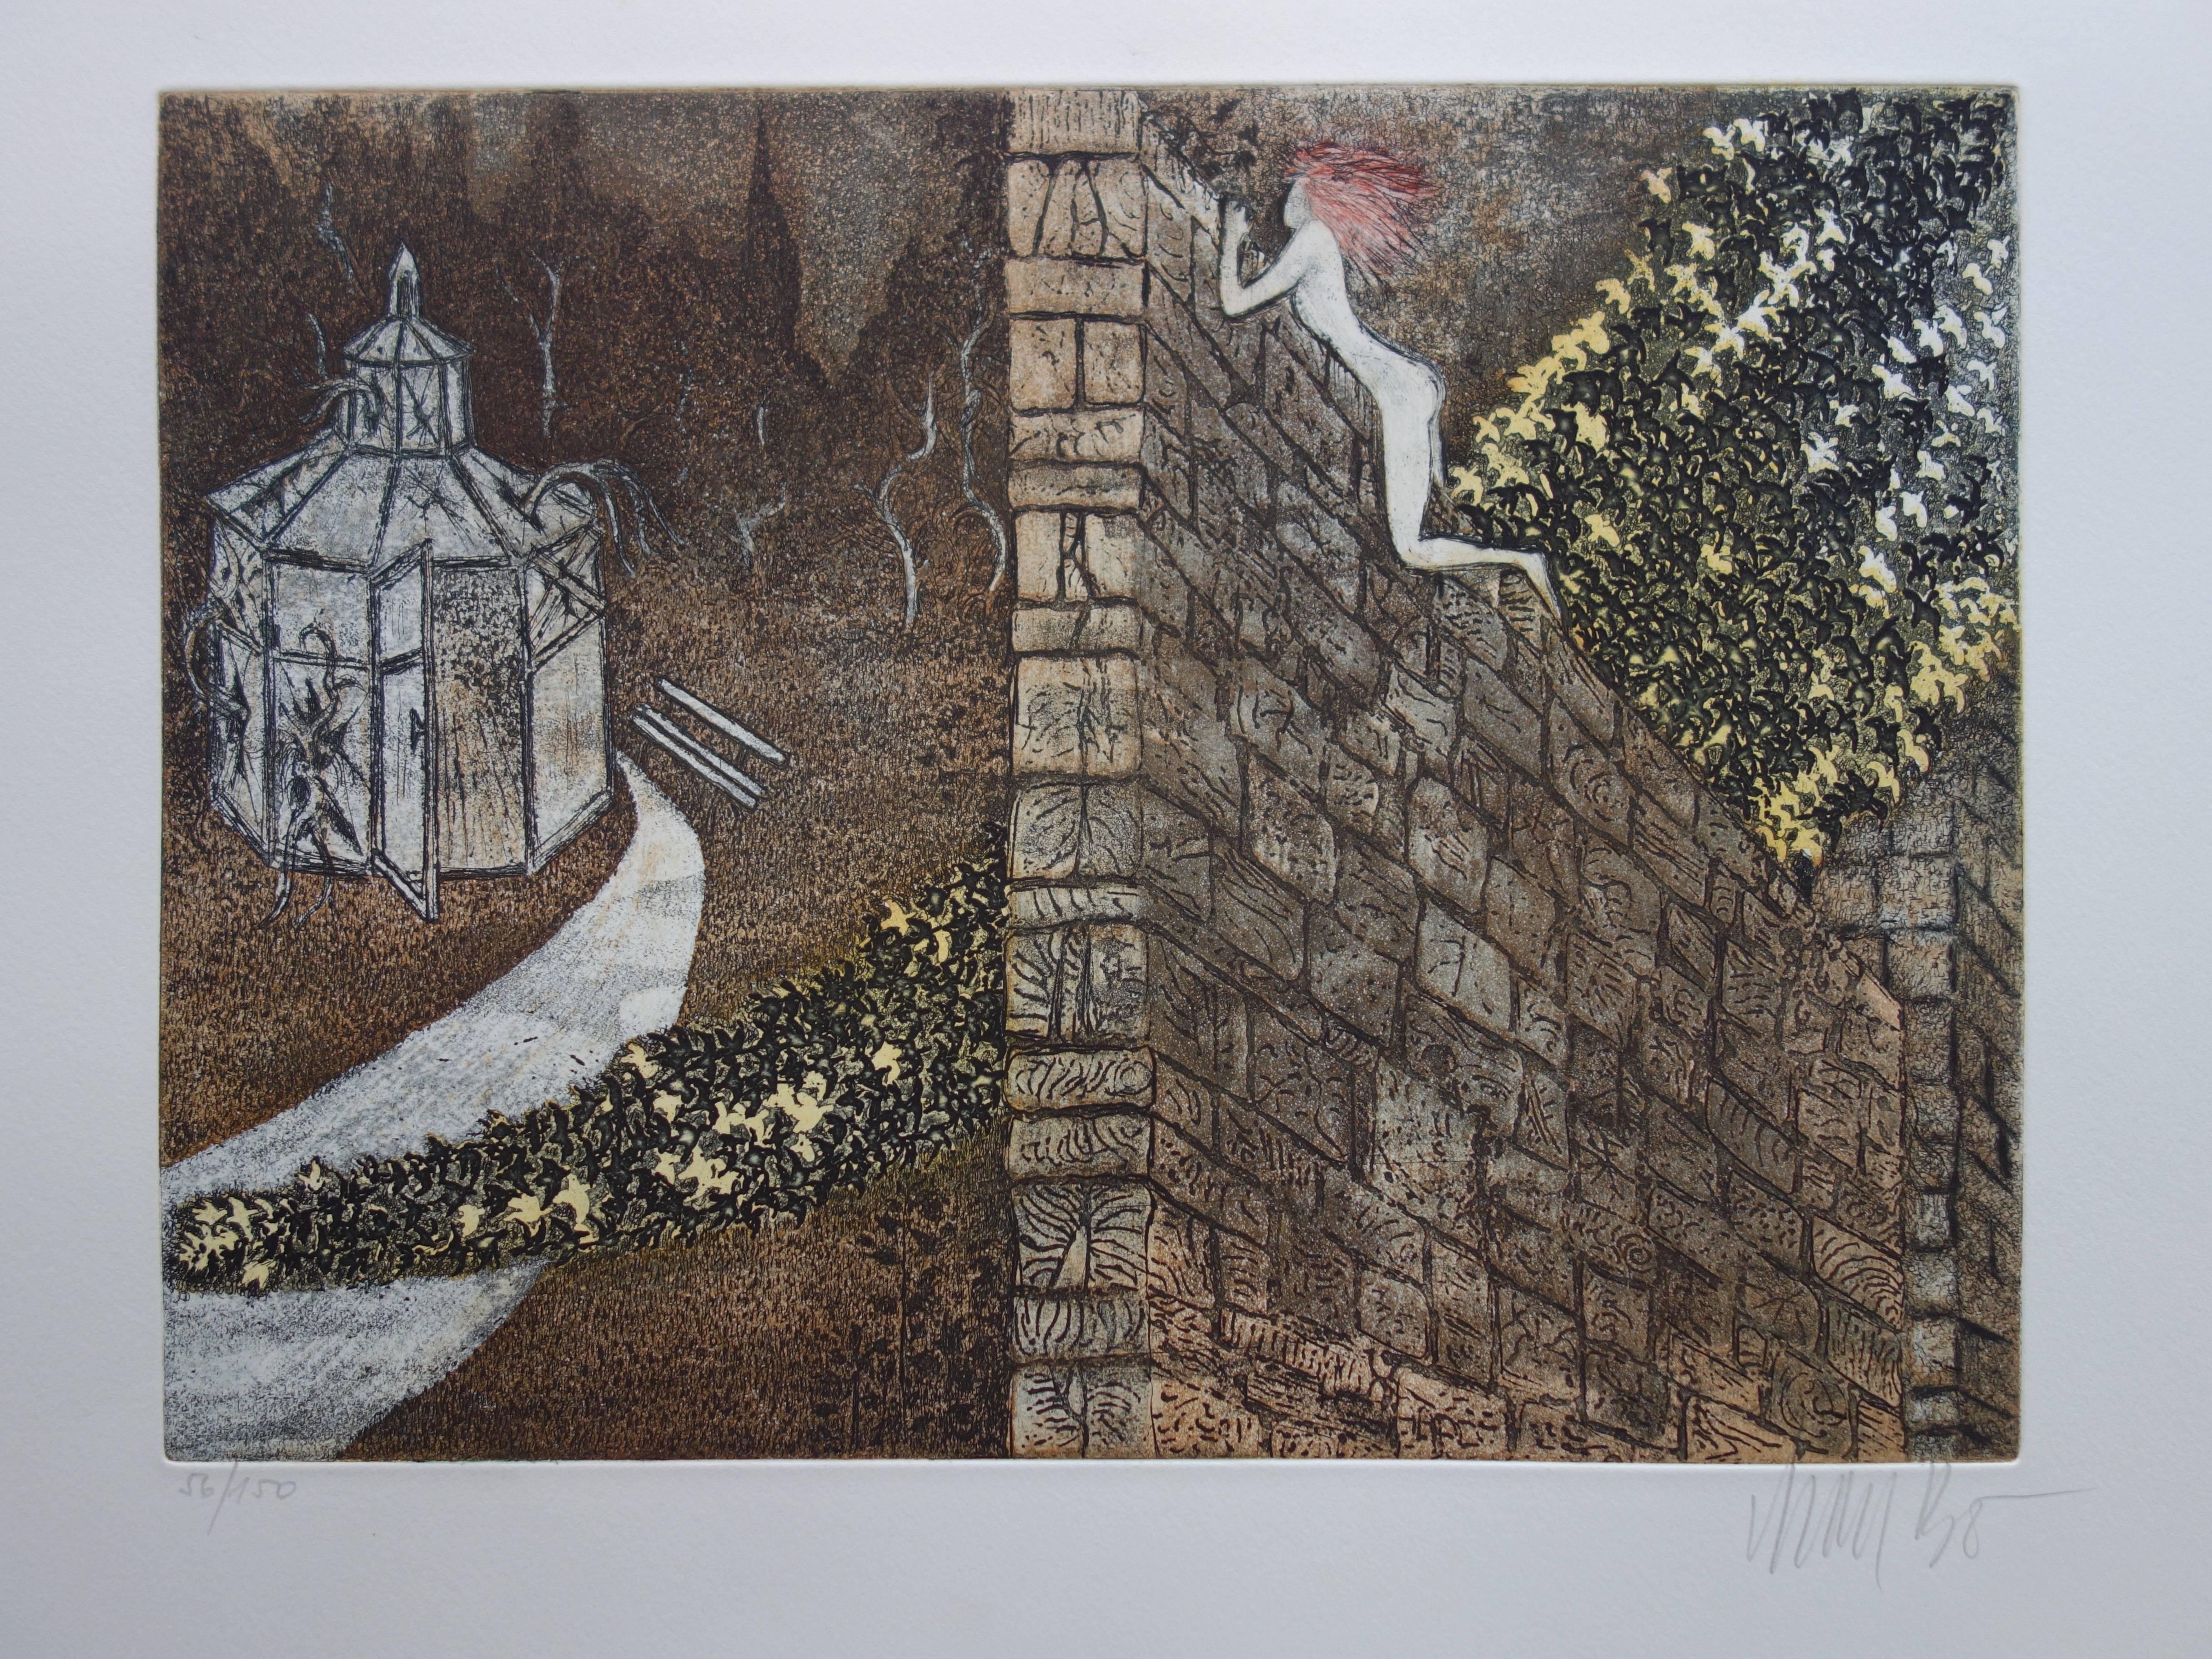 The Other Side of the Wall - Original Handsigned Etching - 150ex